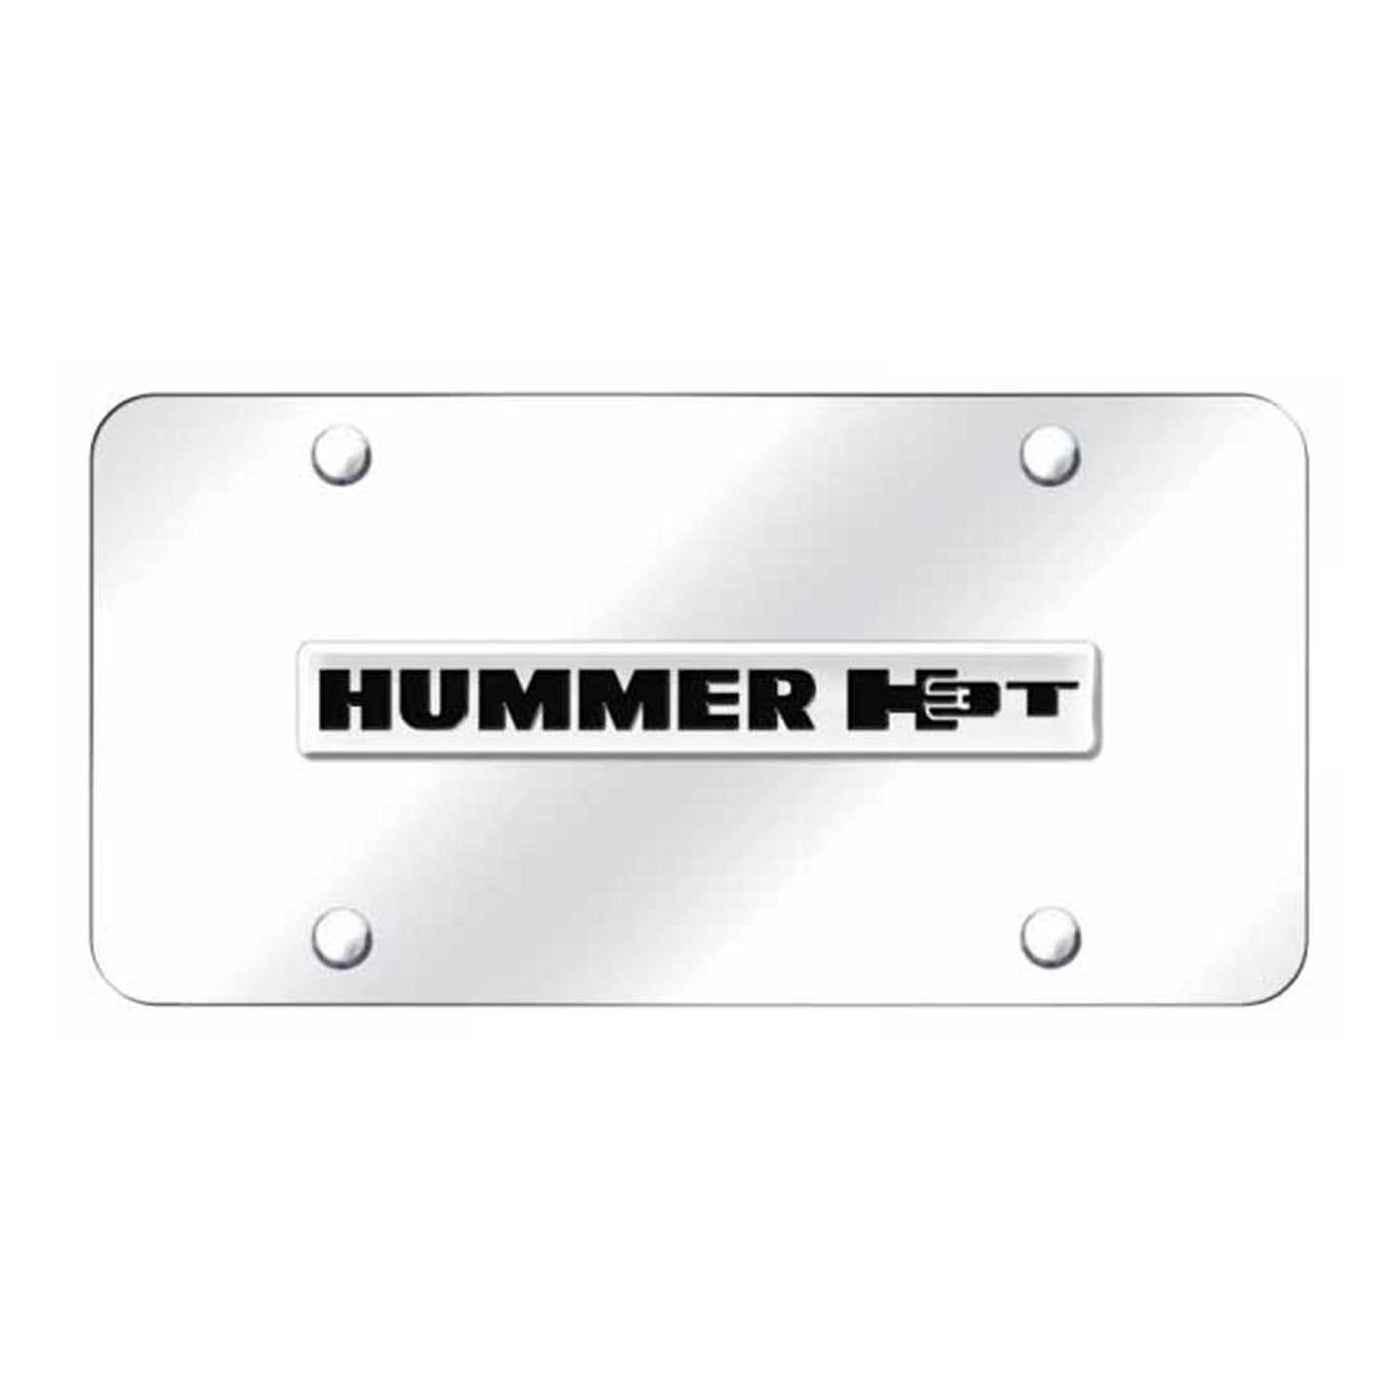 Hummer H3T Name License Plate - Chrome on Mirrored